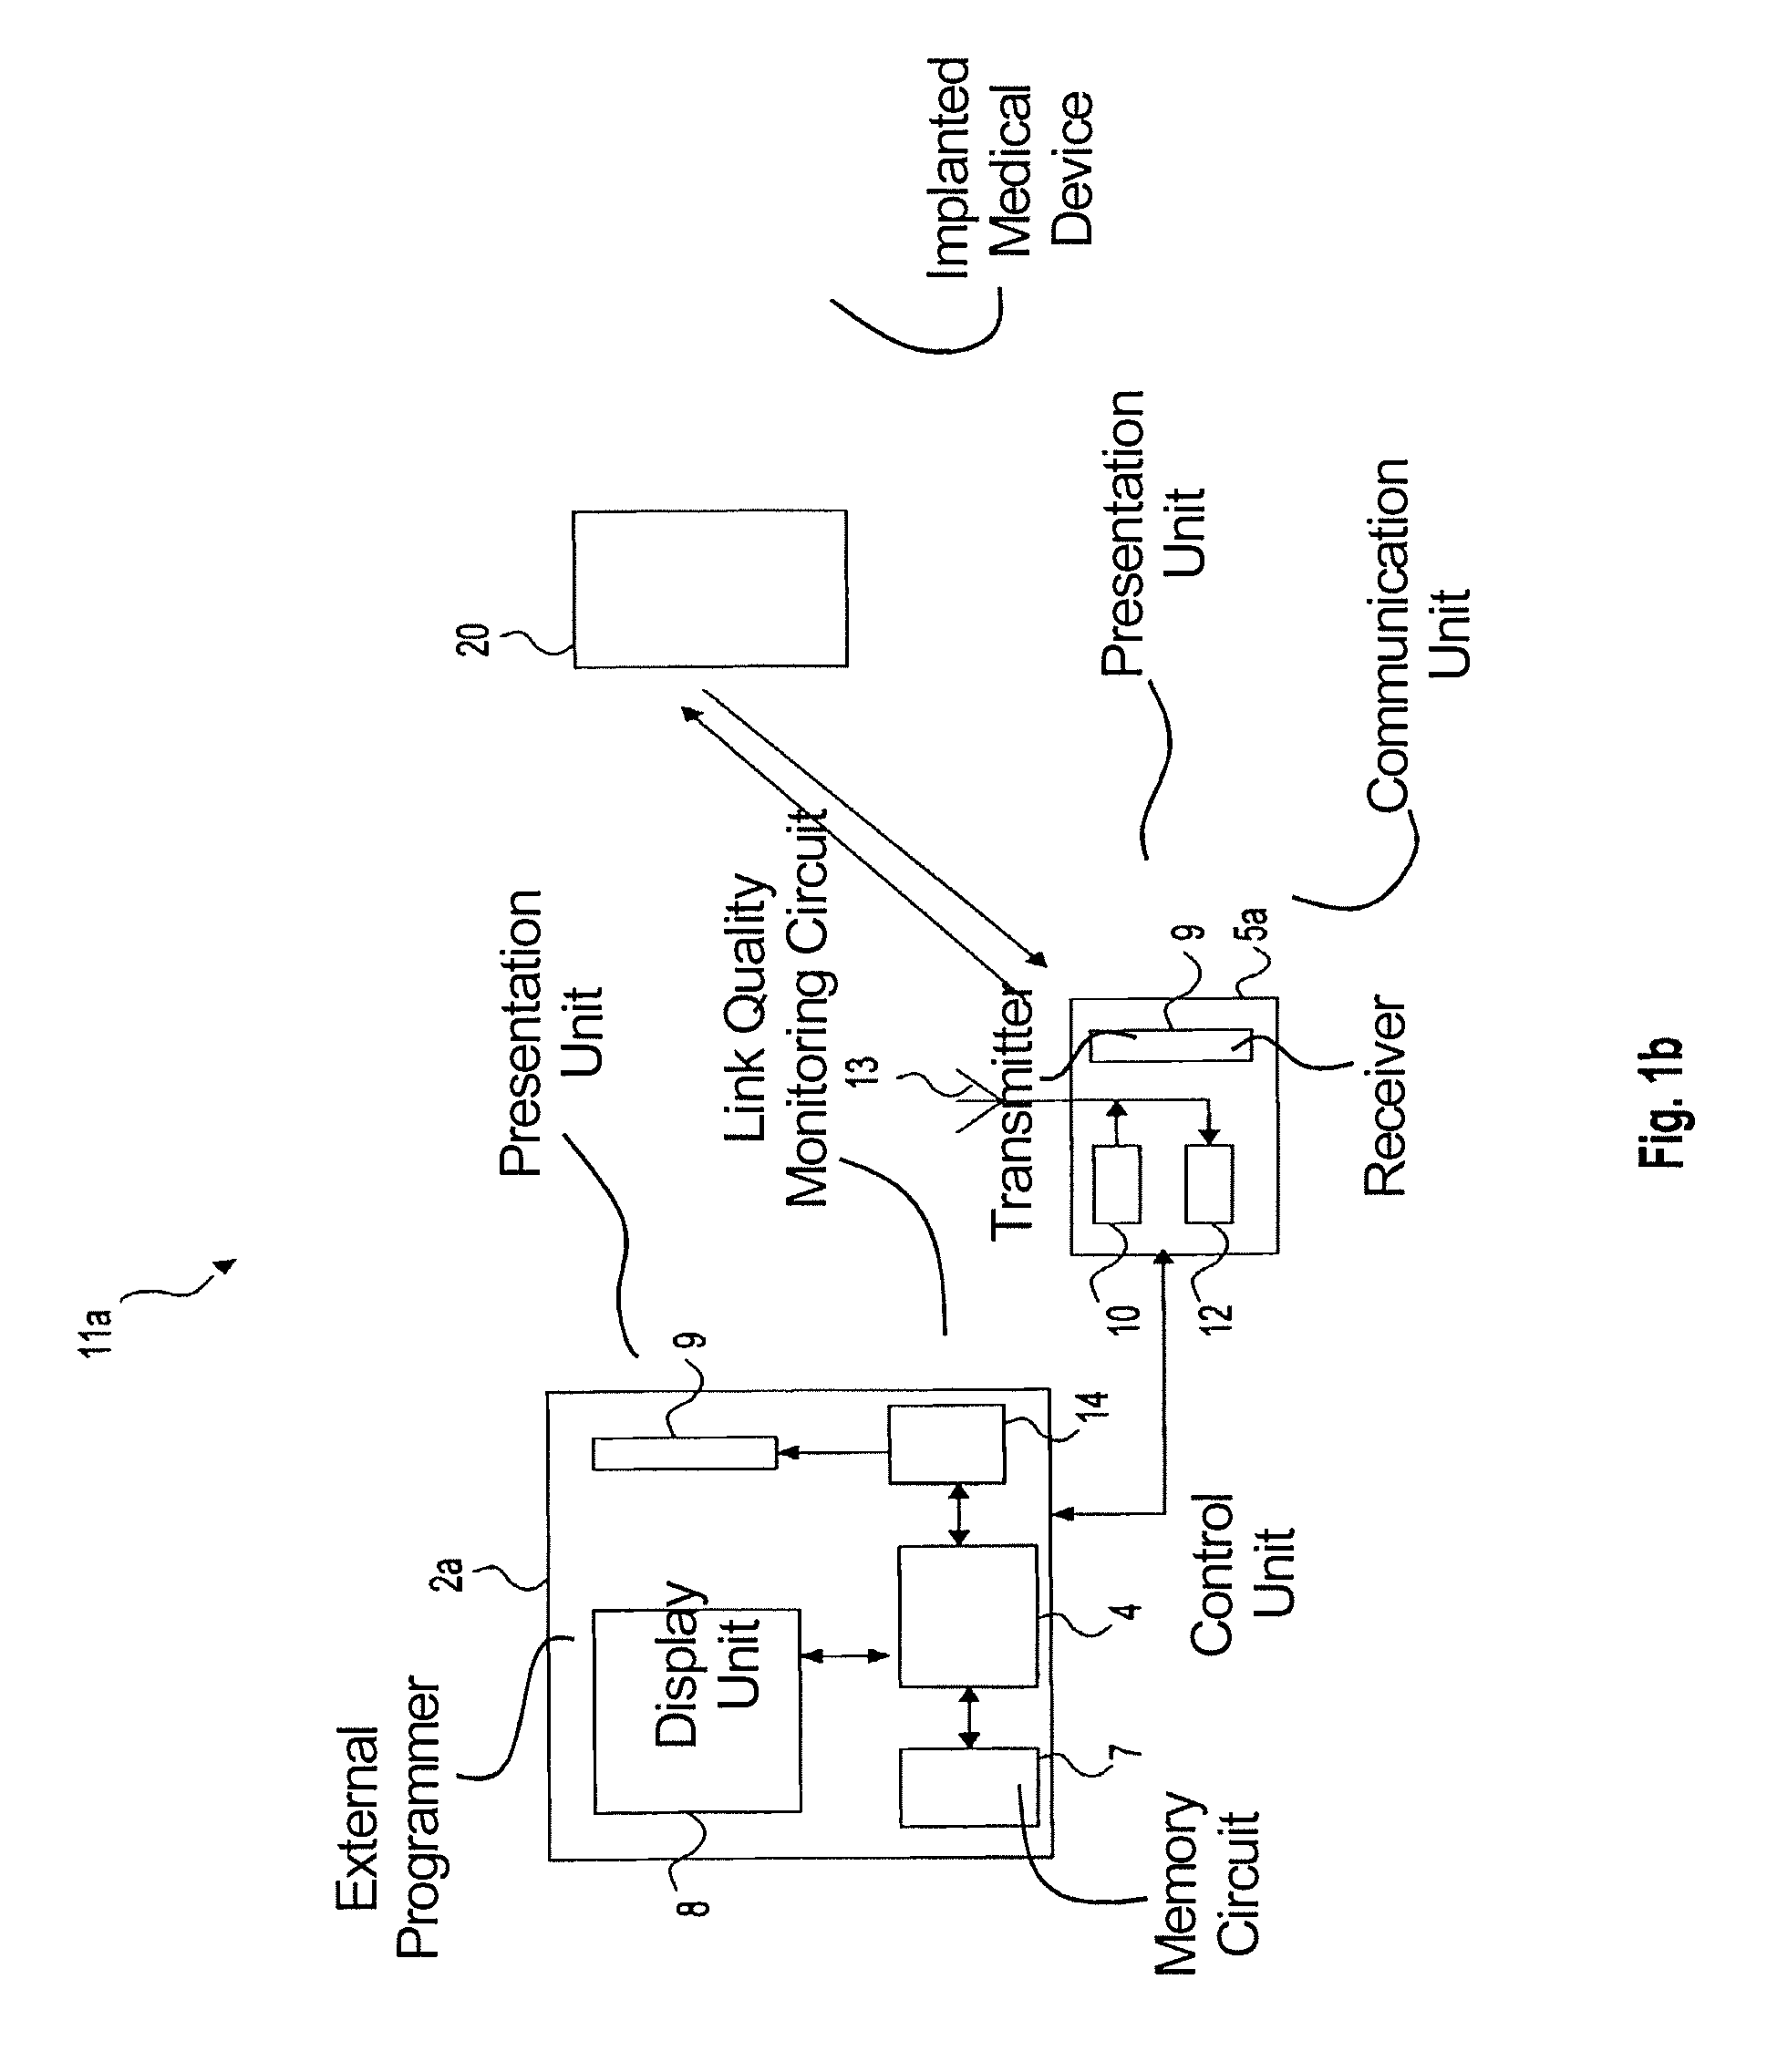 Method and medical system for determining a link quality of a communication link in such a medical system